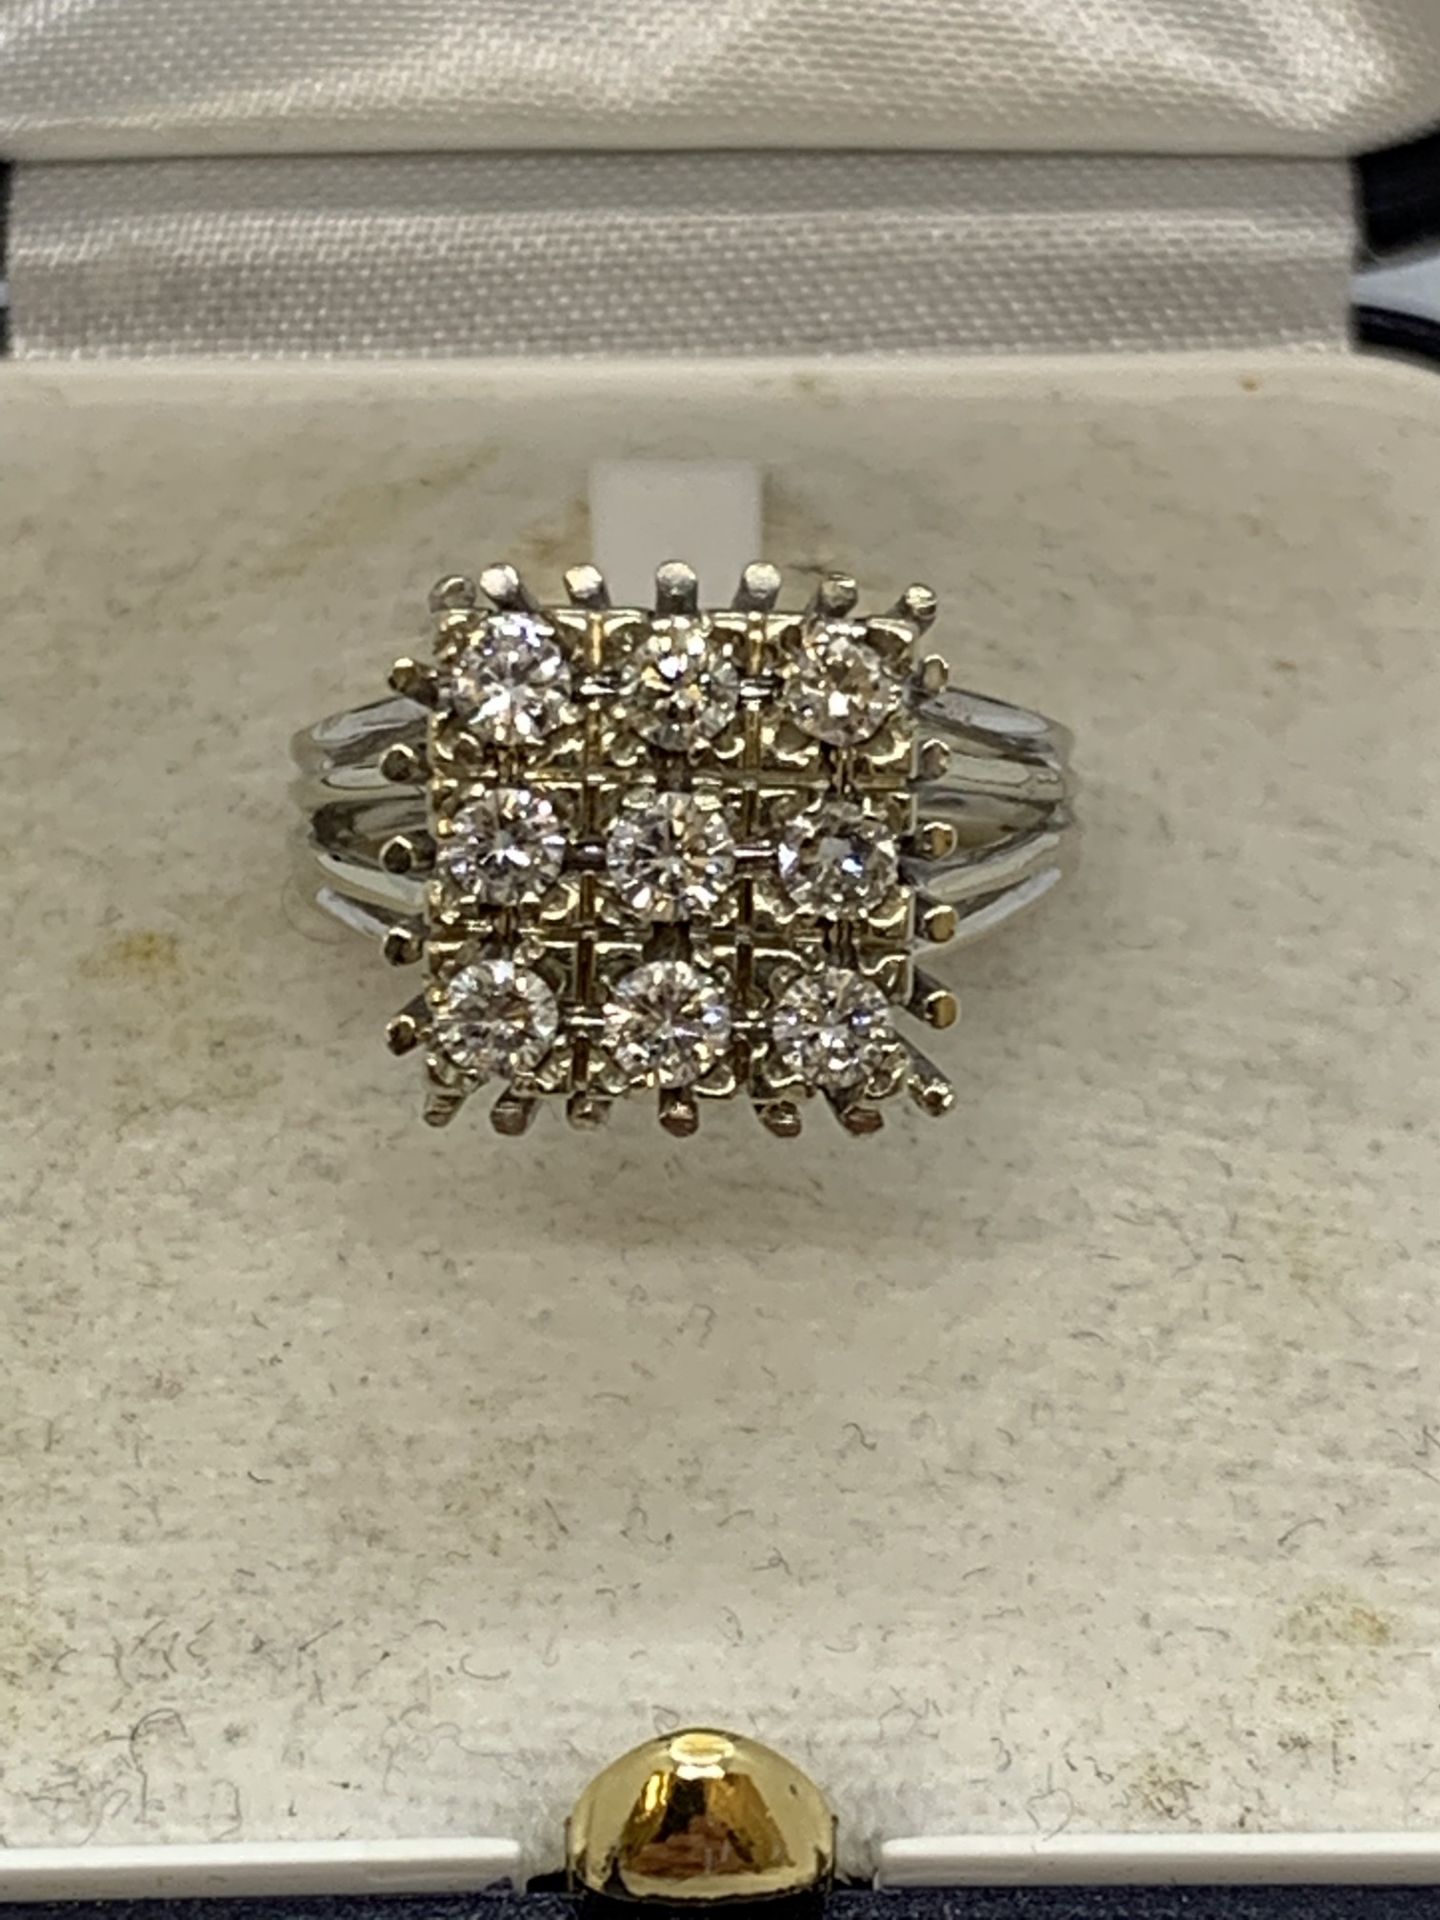 9 x DIAMOND SET RING IN 18ct WHITE/YELLOW GOLD - 6.7g APPROX - SIZE M APPROX - Image 3 of 6